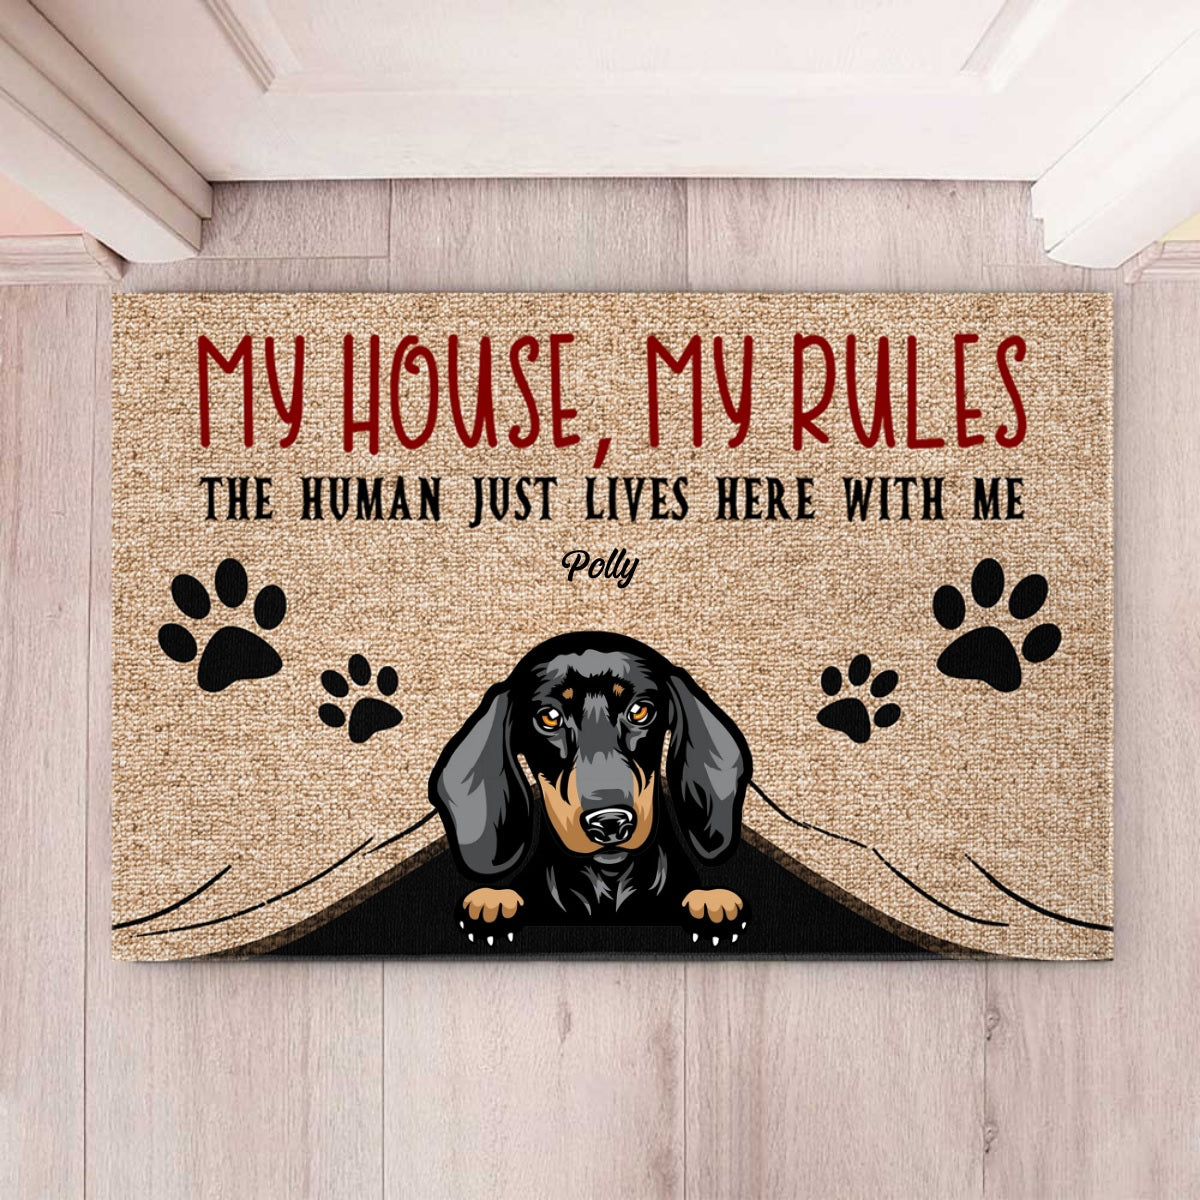 Our House Our Rules The Human Just Lives Here With Us - Personalized Doormat